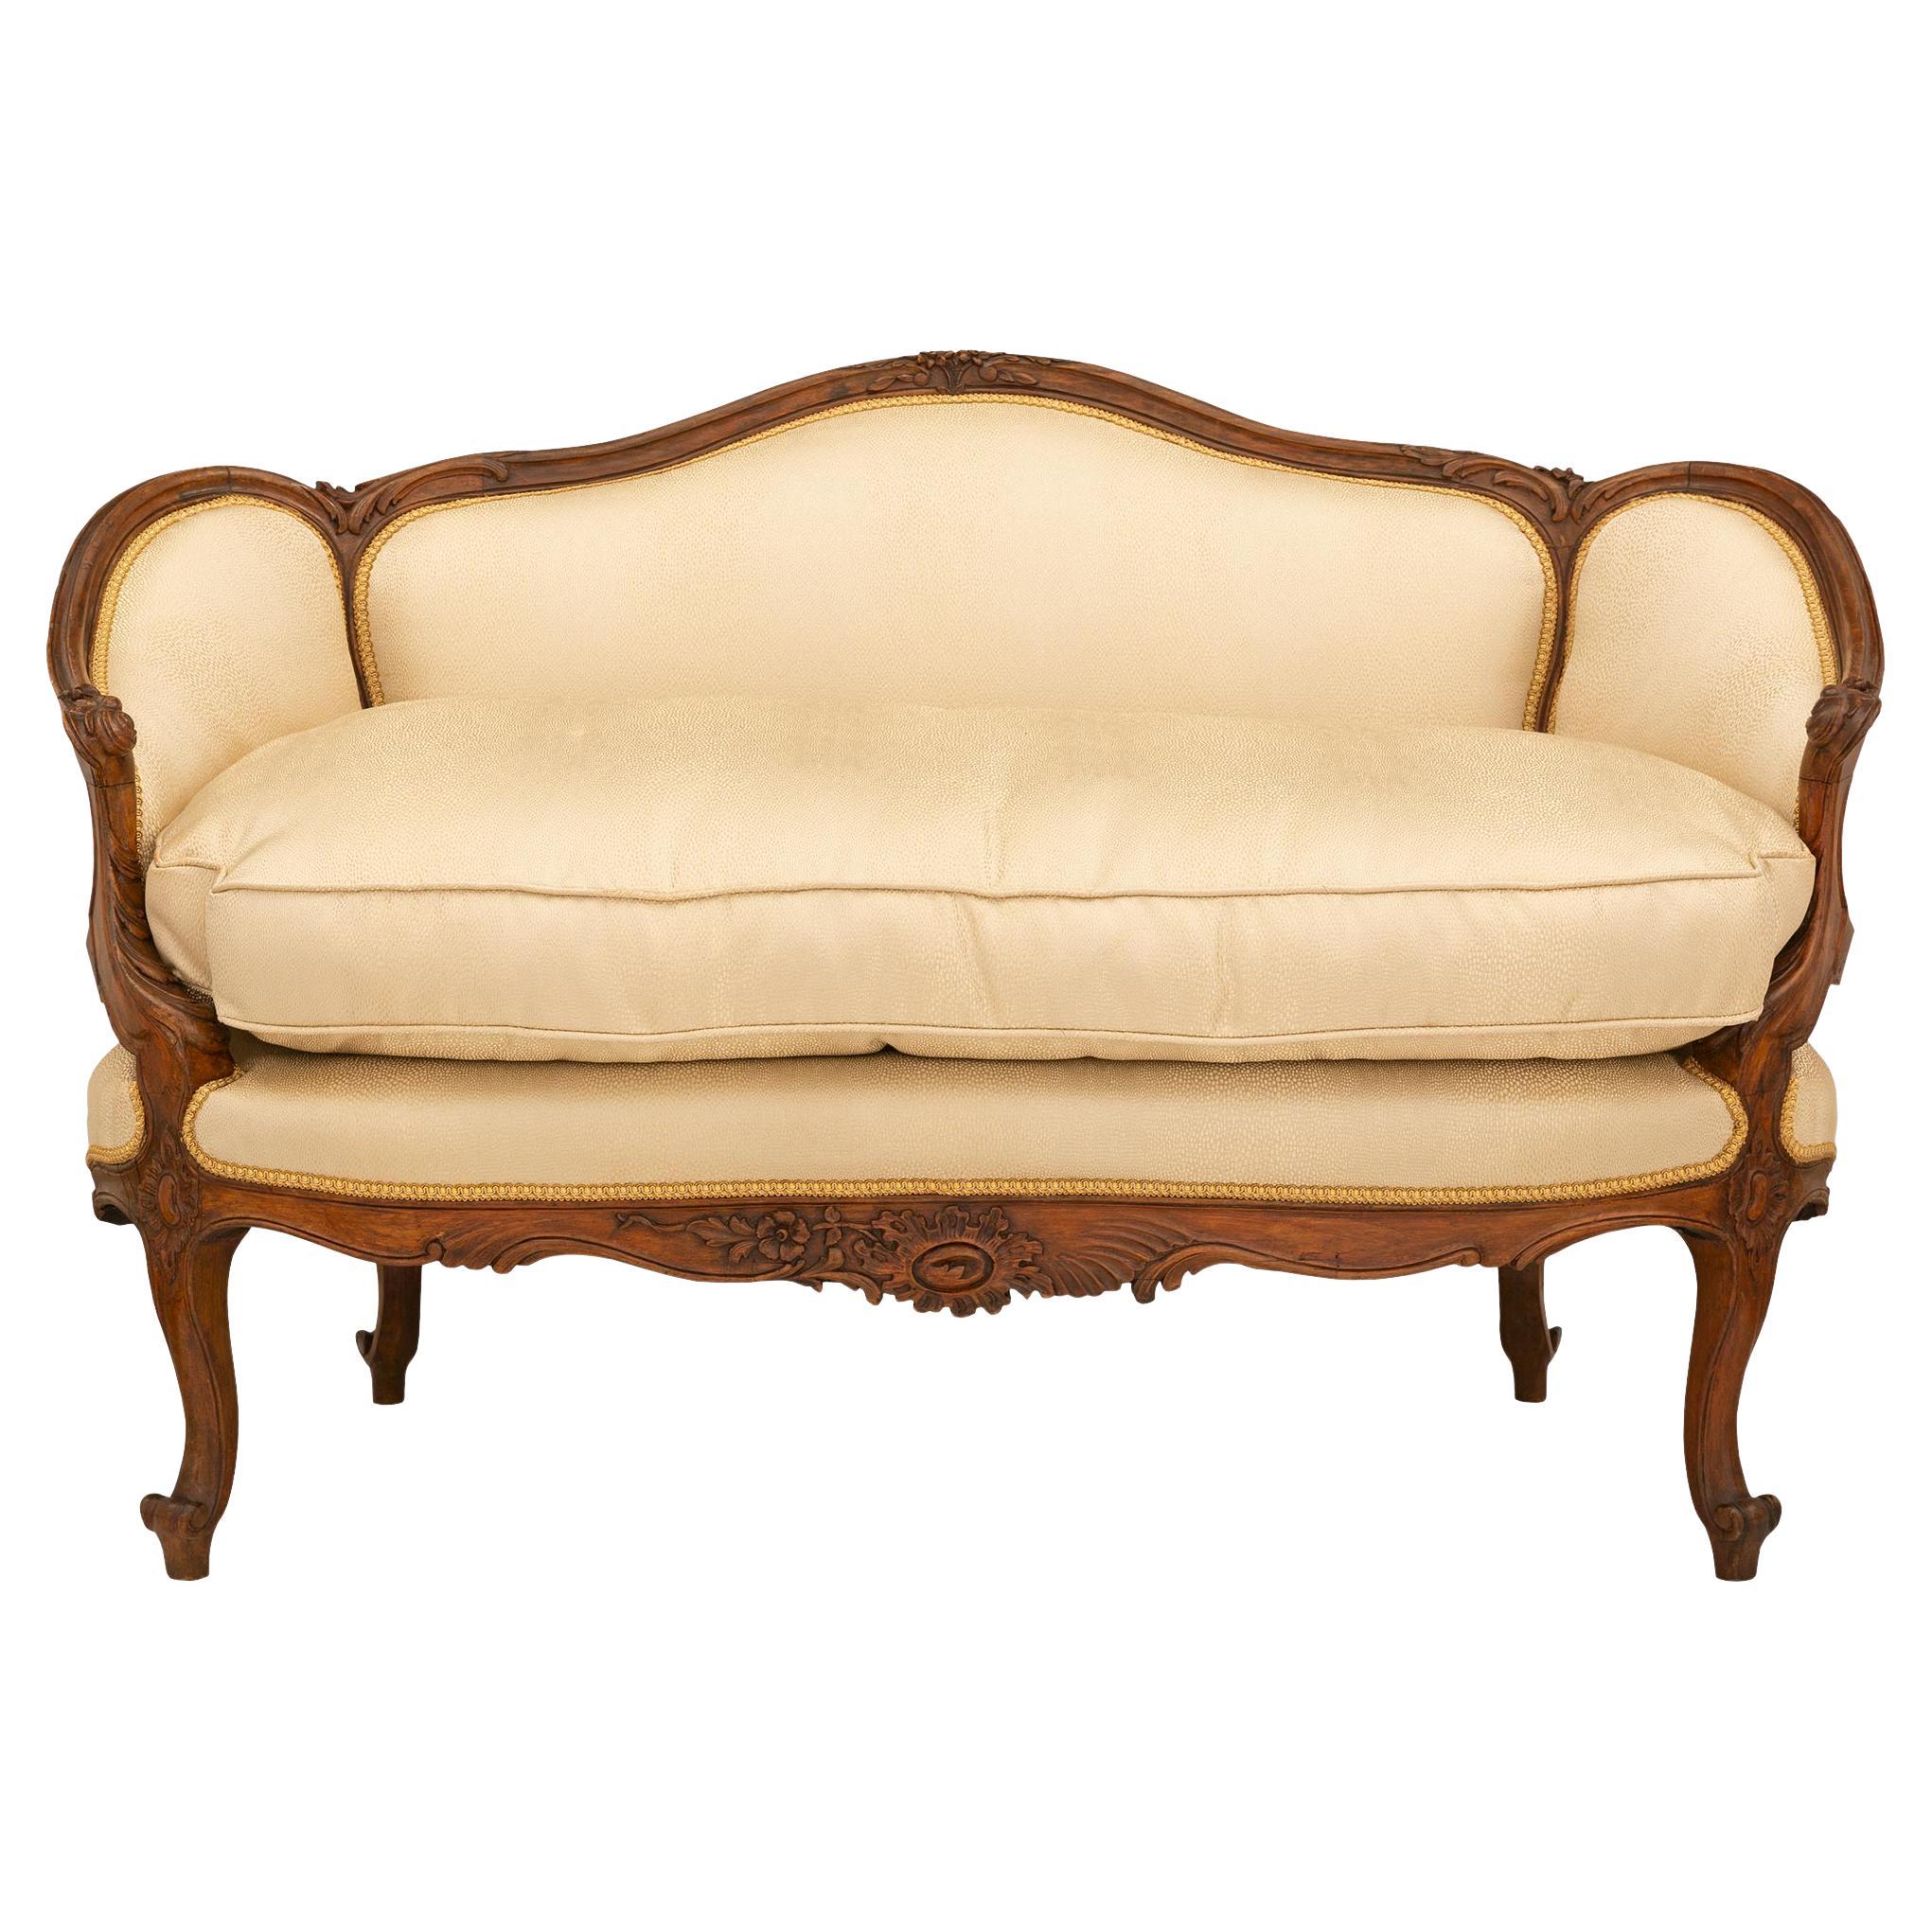 A French 19th century Louis XV st. walnut settee